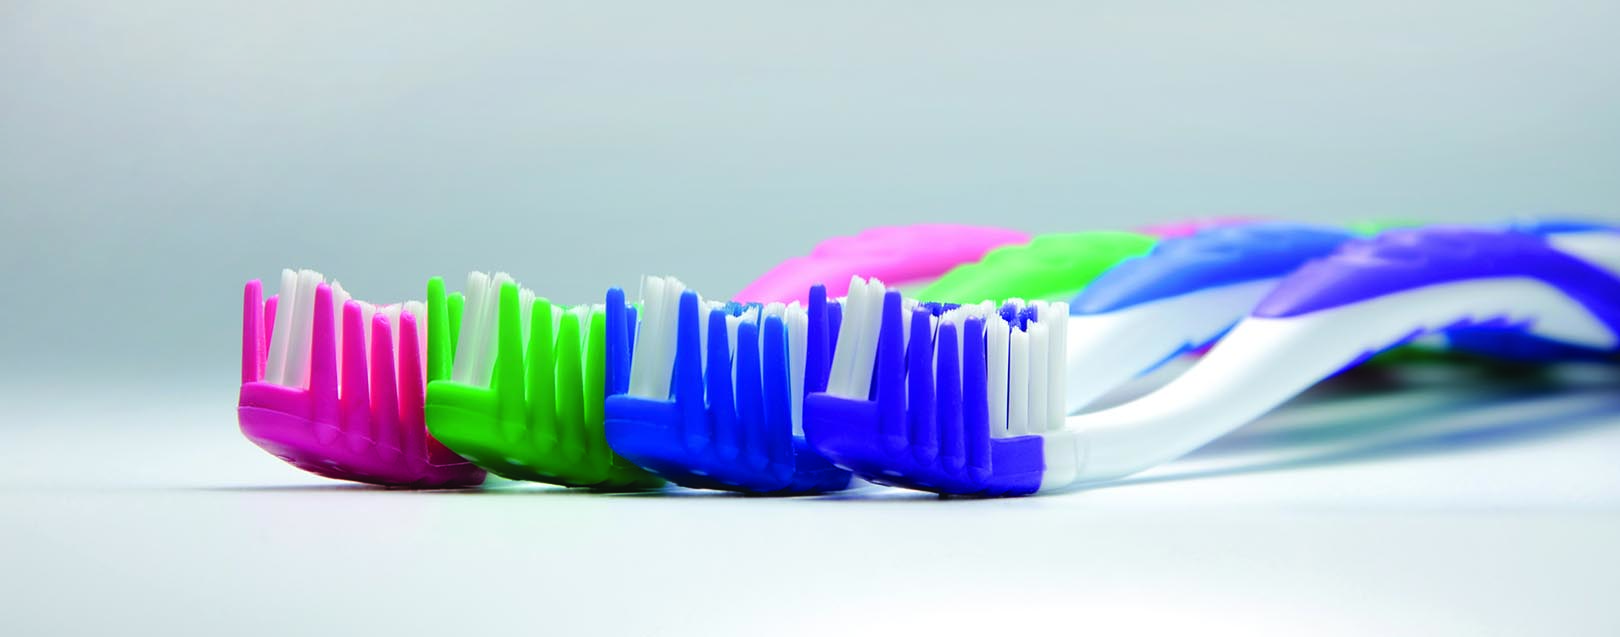 Toothbrush - Sink your teeth into this product! March 2018 issue